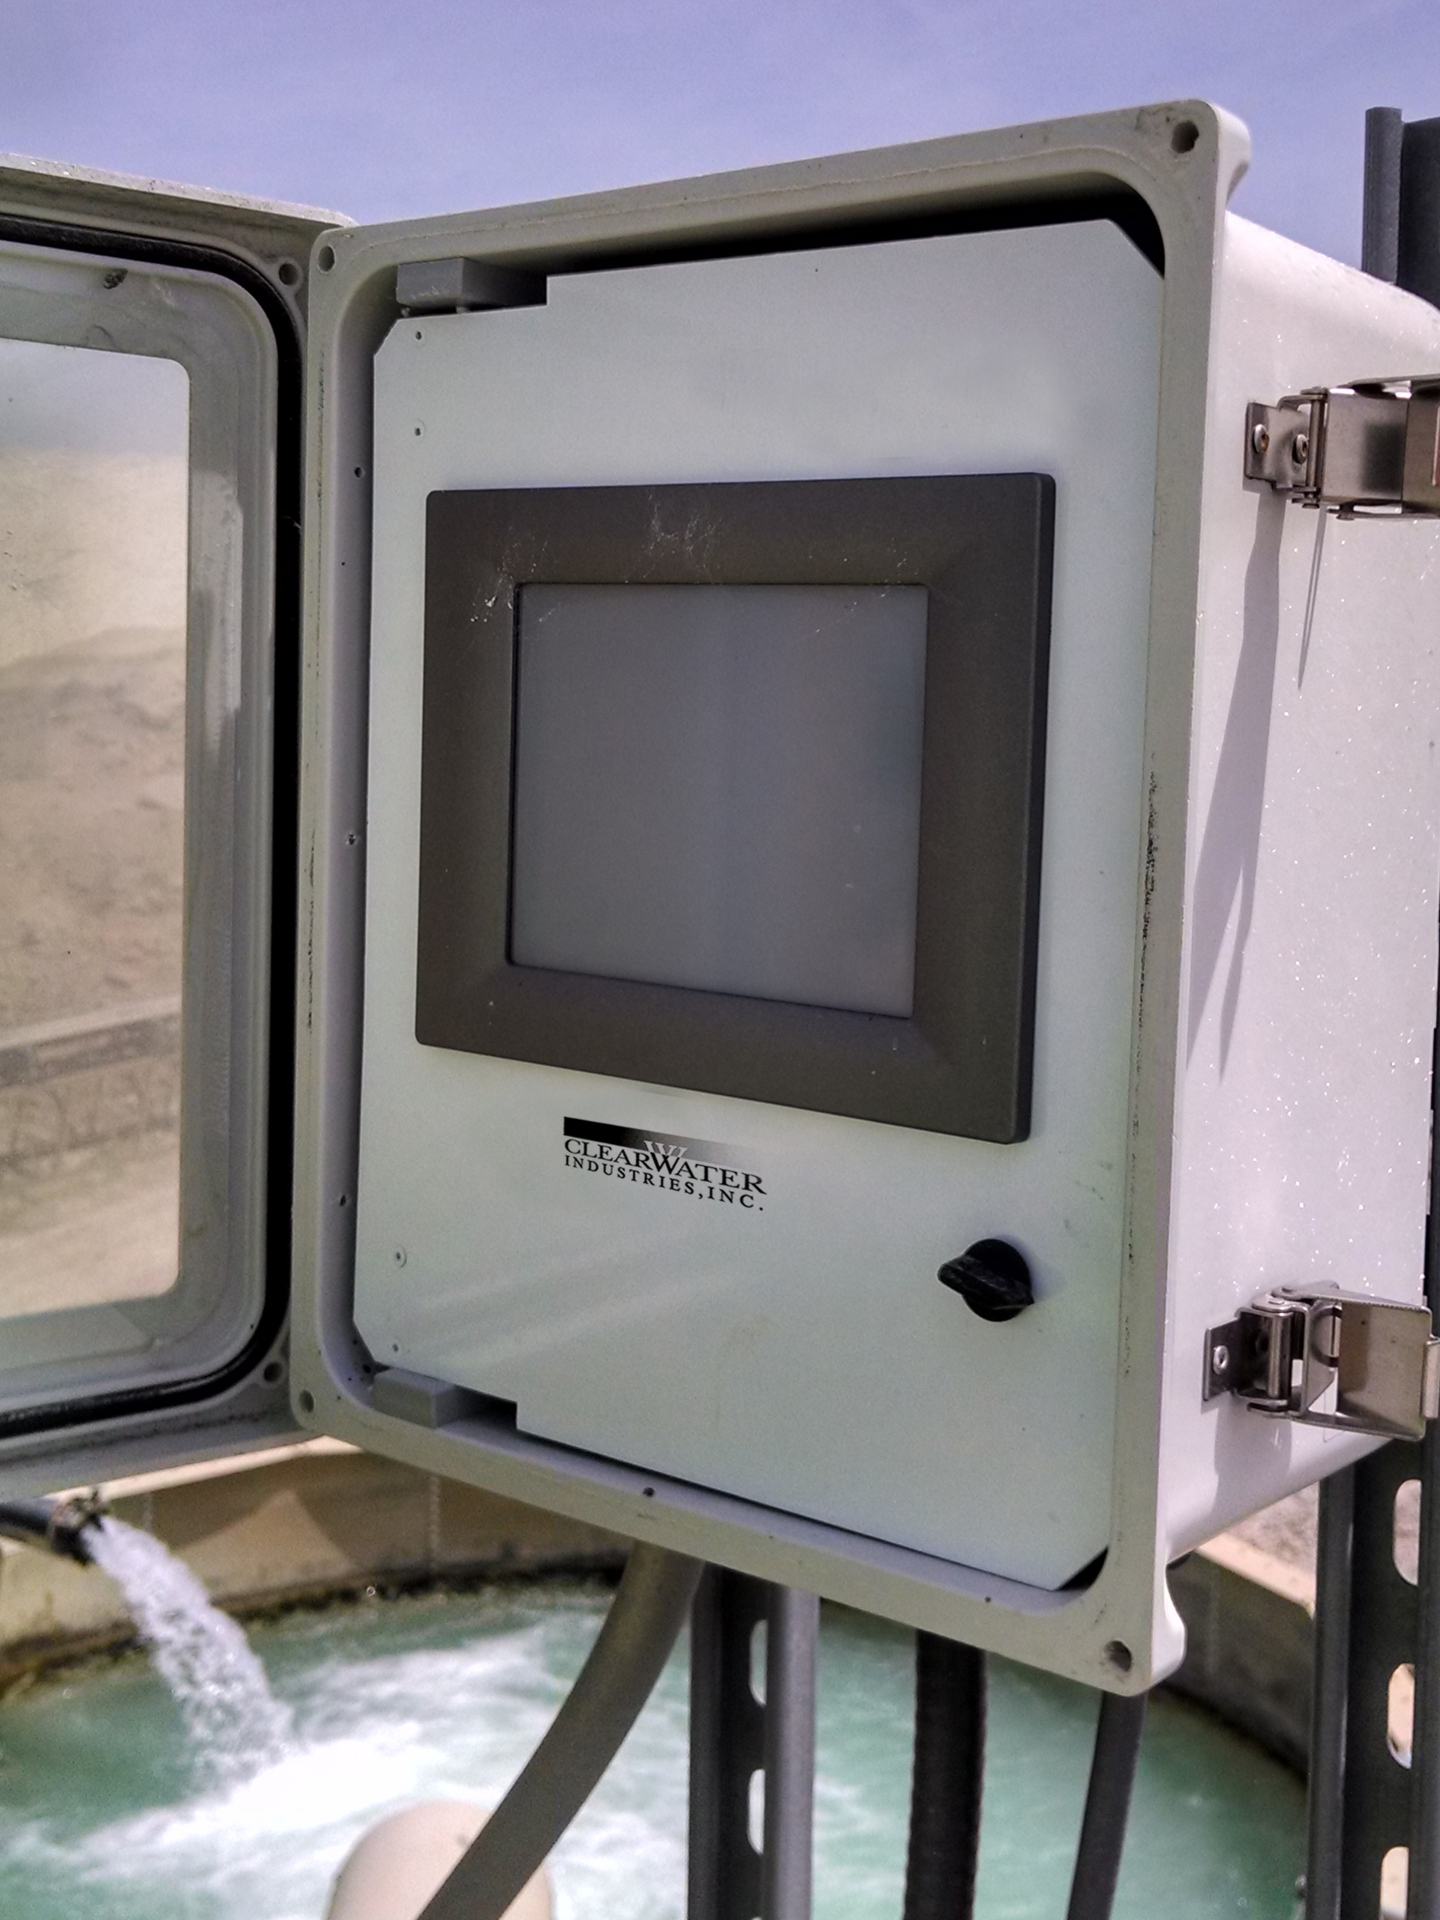 A touchscreen device that acts as the messenger screen for Clearwater's Autofloc system setup at a sand and gravel facility.